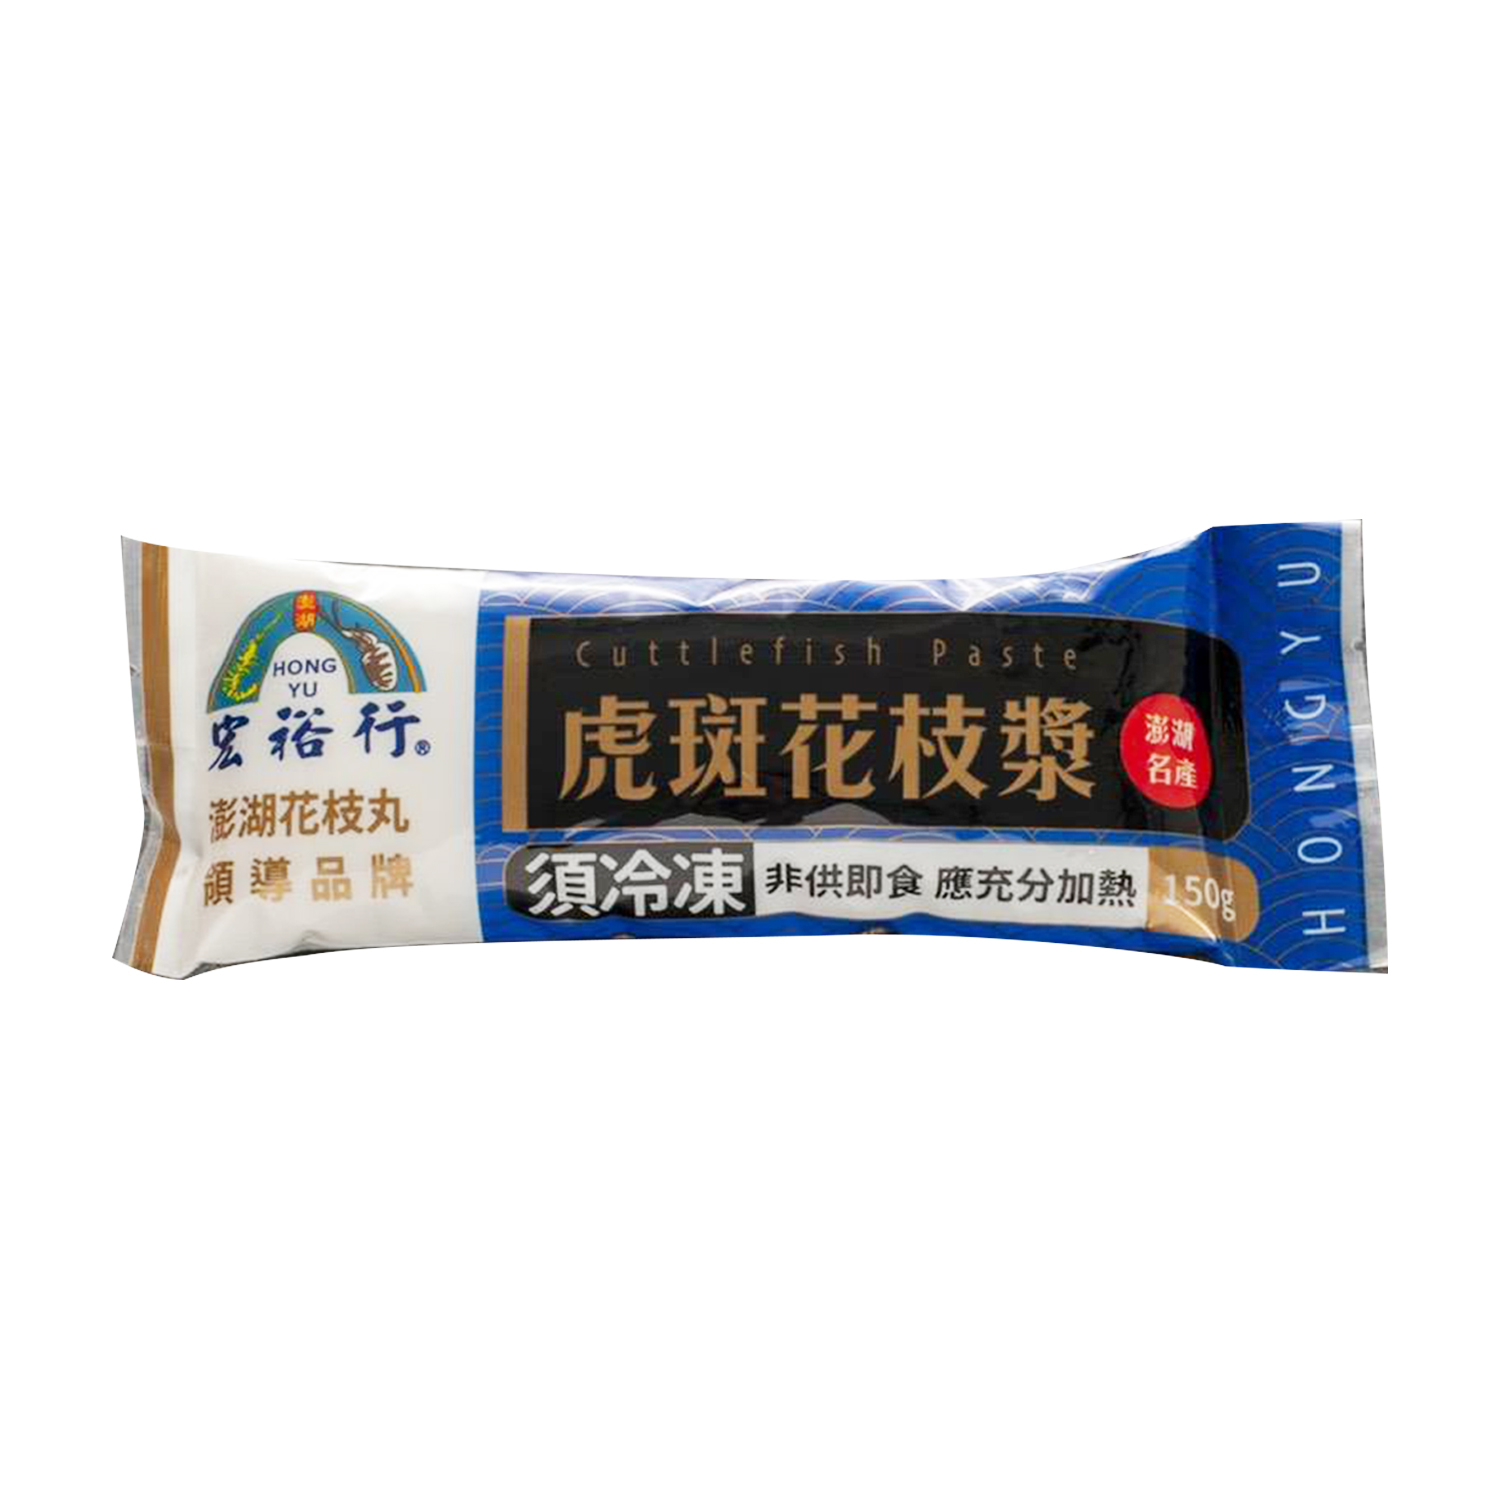 HONG YU Cuttlefish Paste 150g-eBest-Weekly Special,BBQ & Hotpot,Frozen food